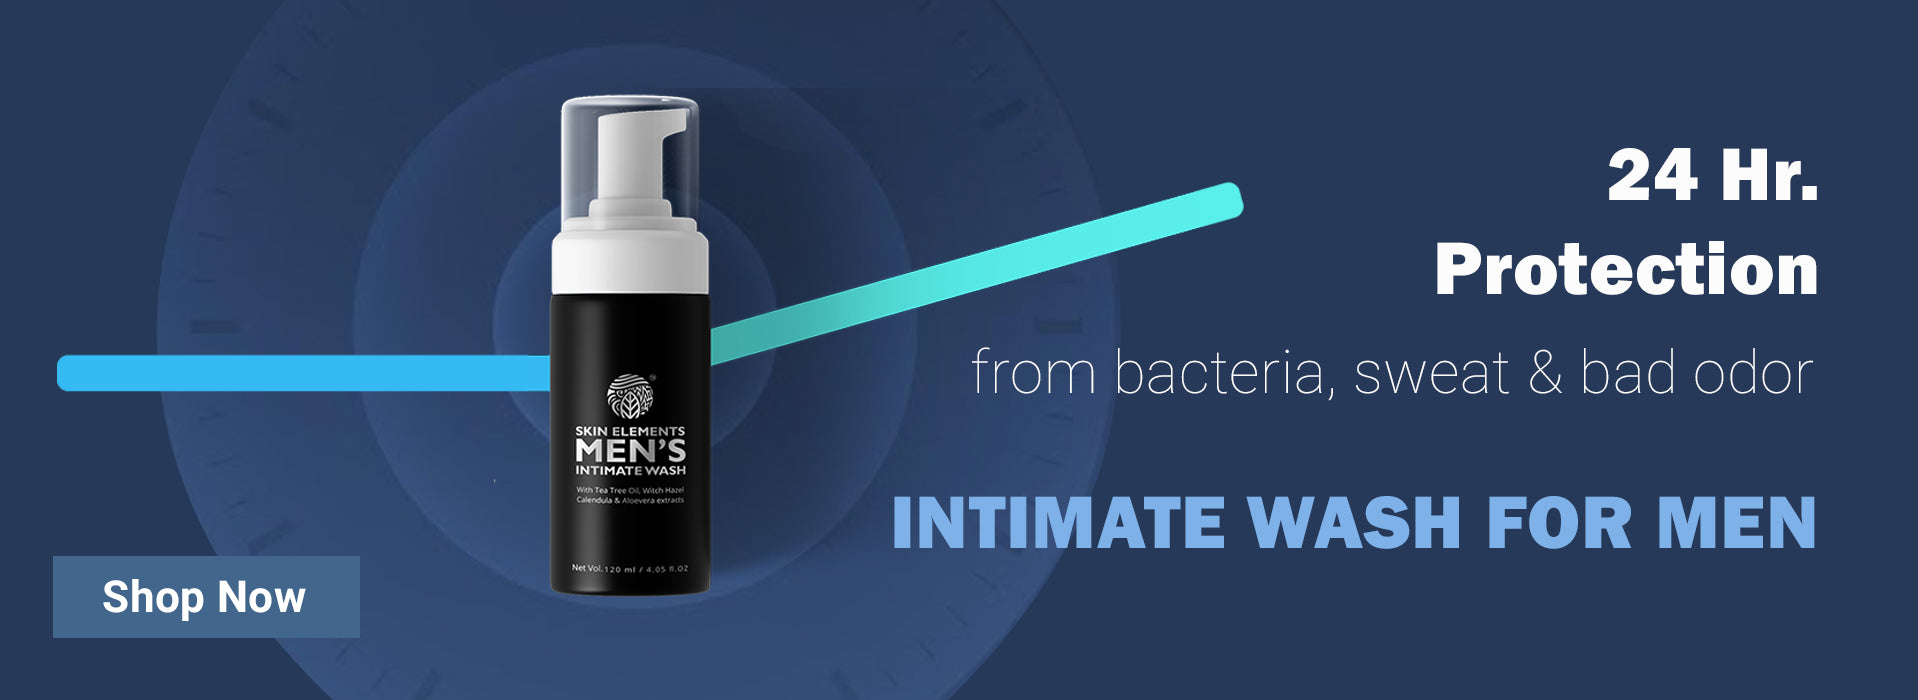 male intimate hygiene products